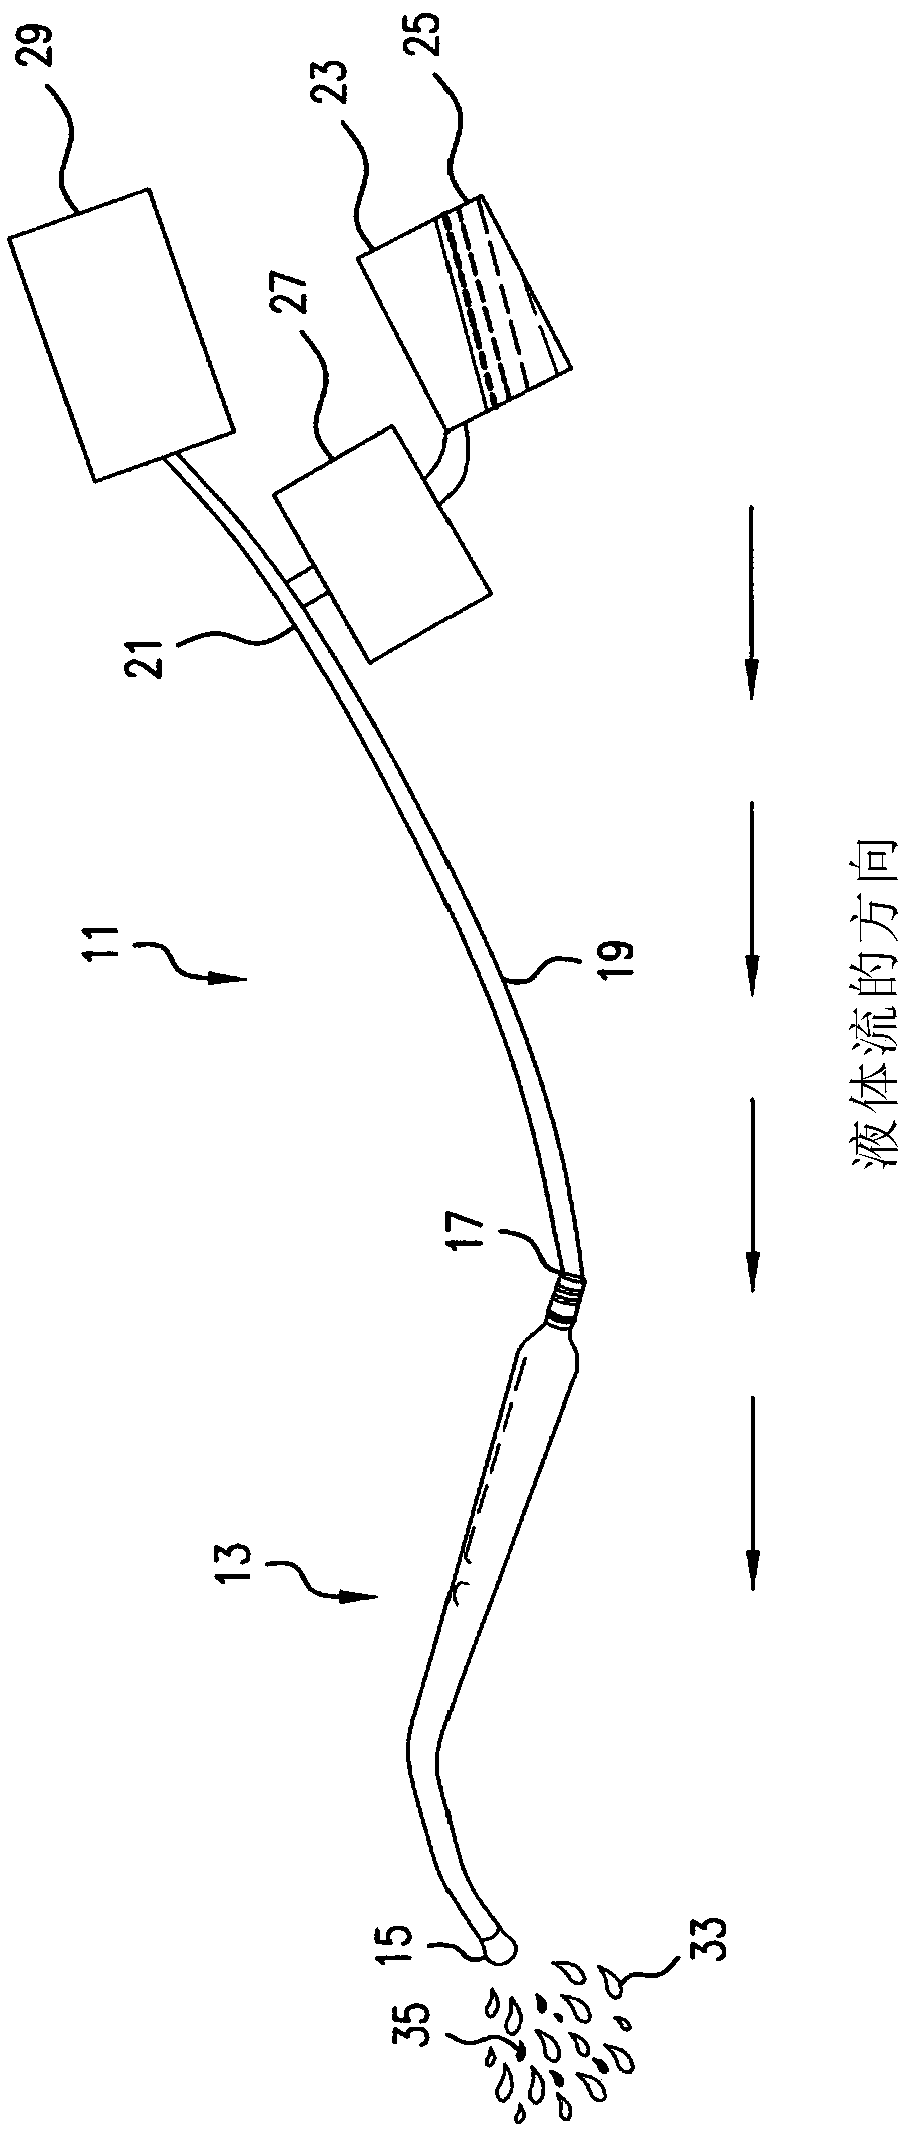 Yankauer suction system and related methods with clog removal functionality